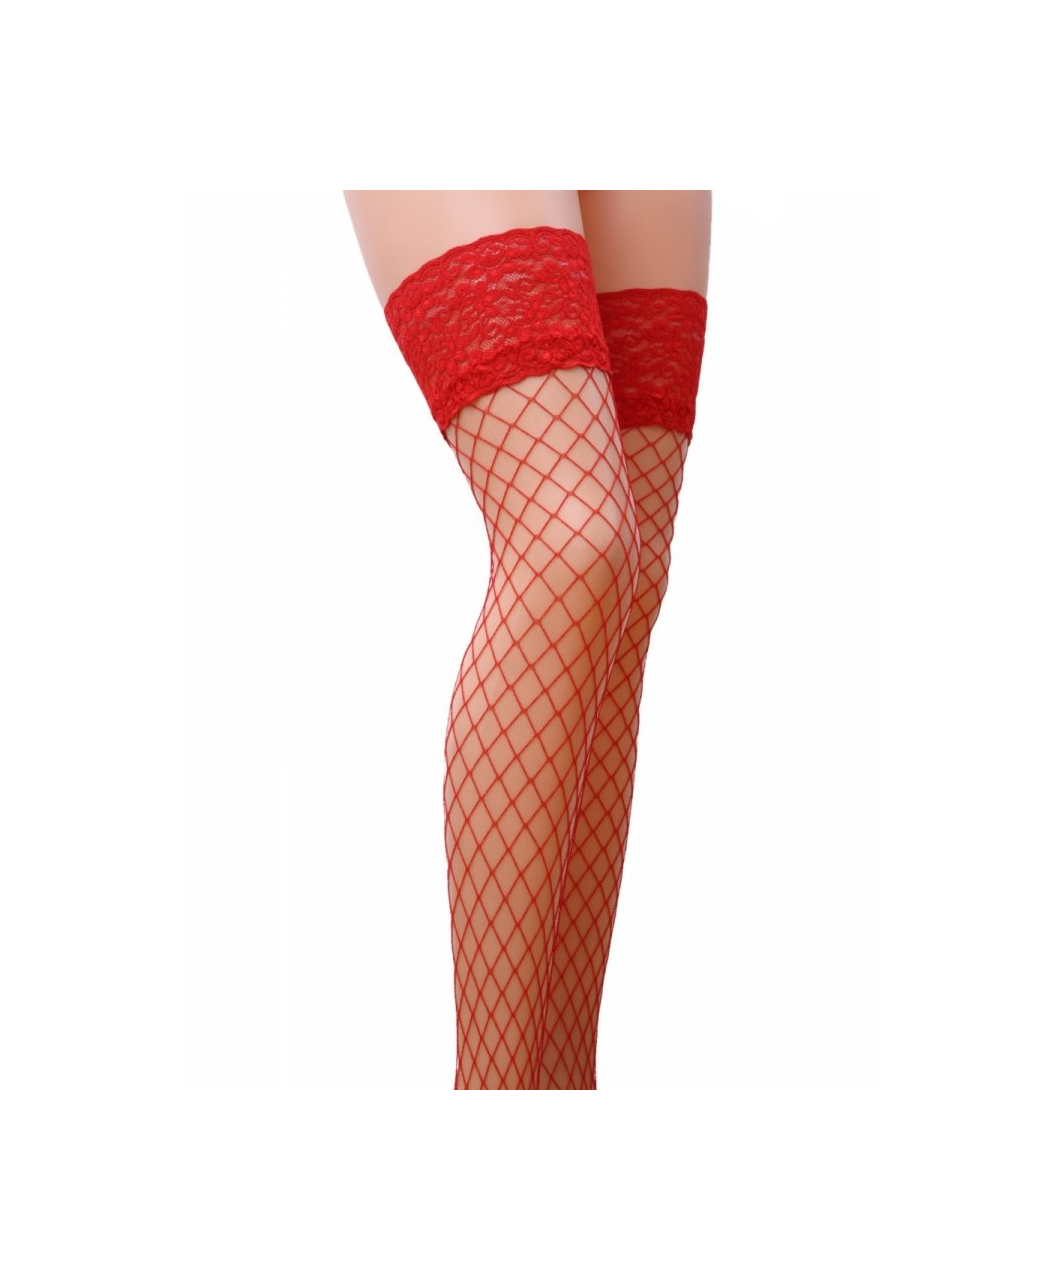 Passion red net hold-up stockings